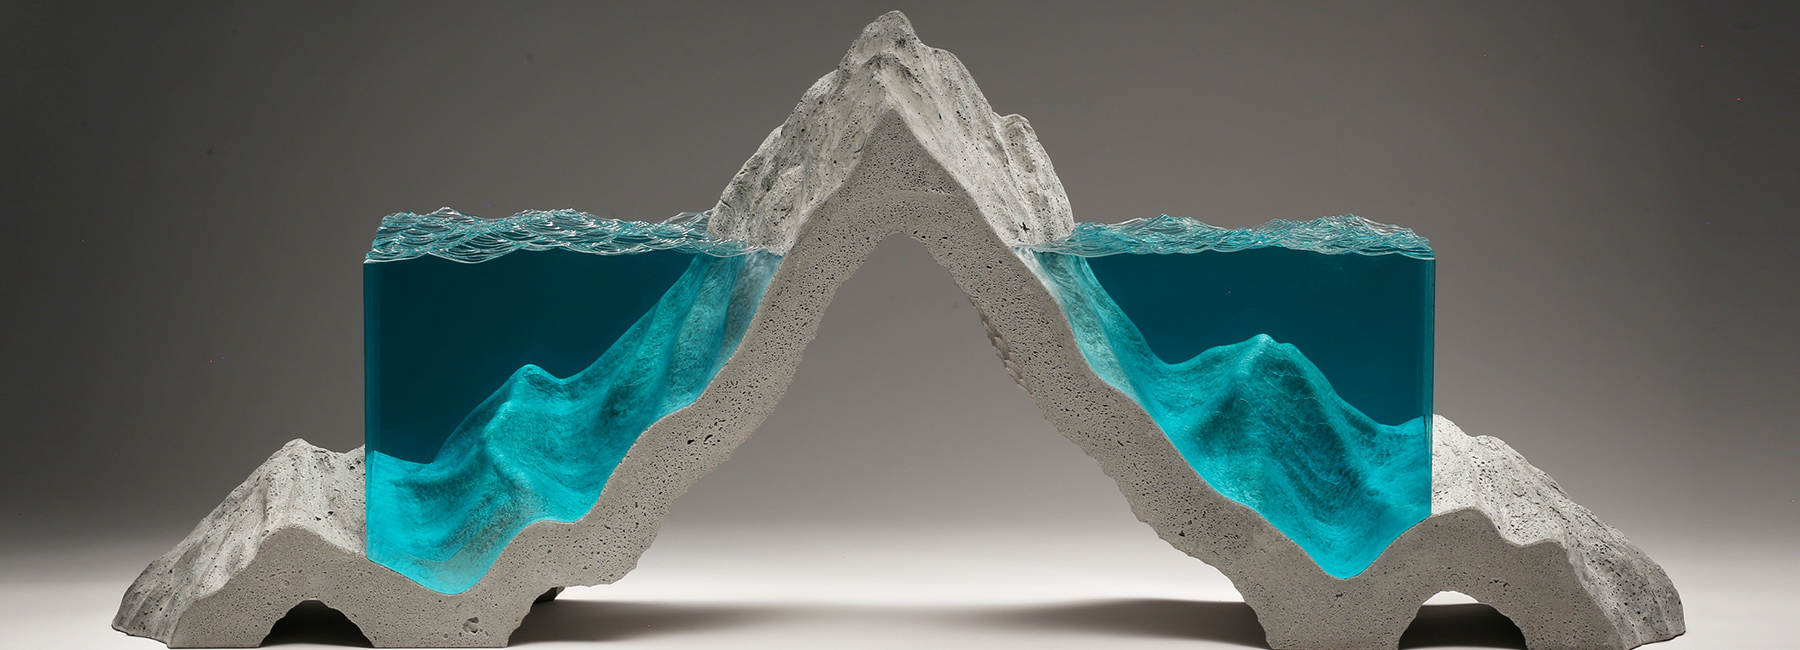 Ben Young Glass and Concrete15